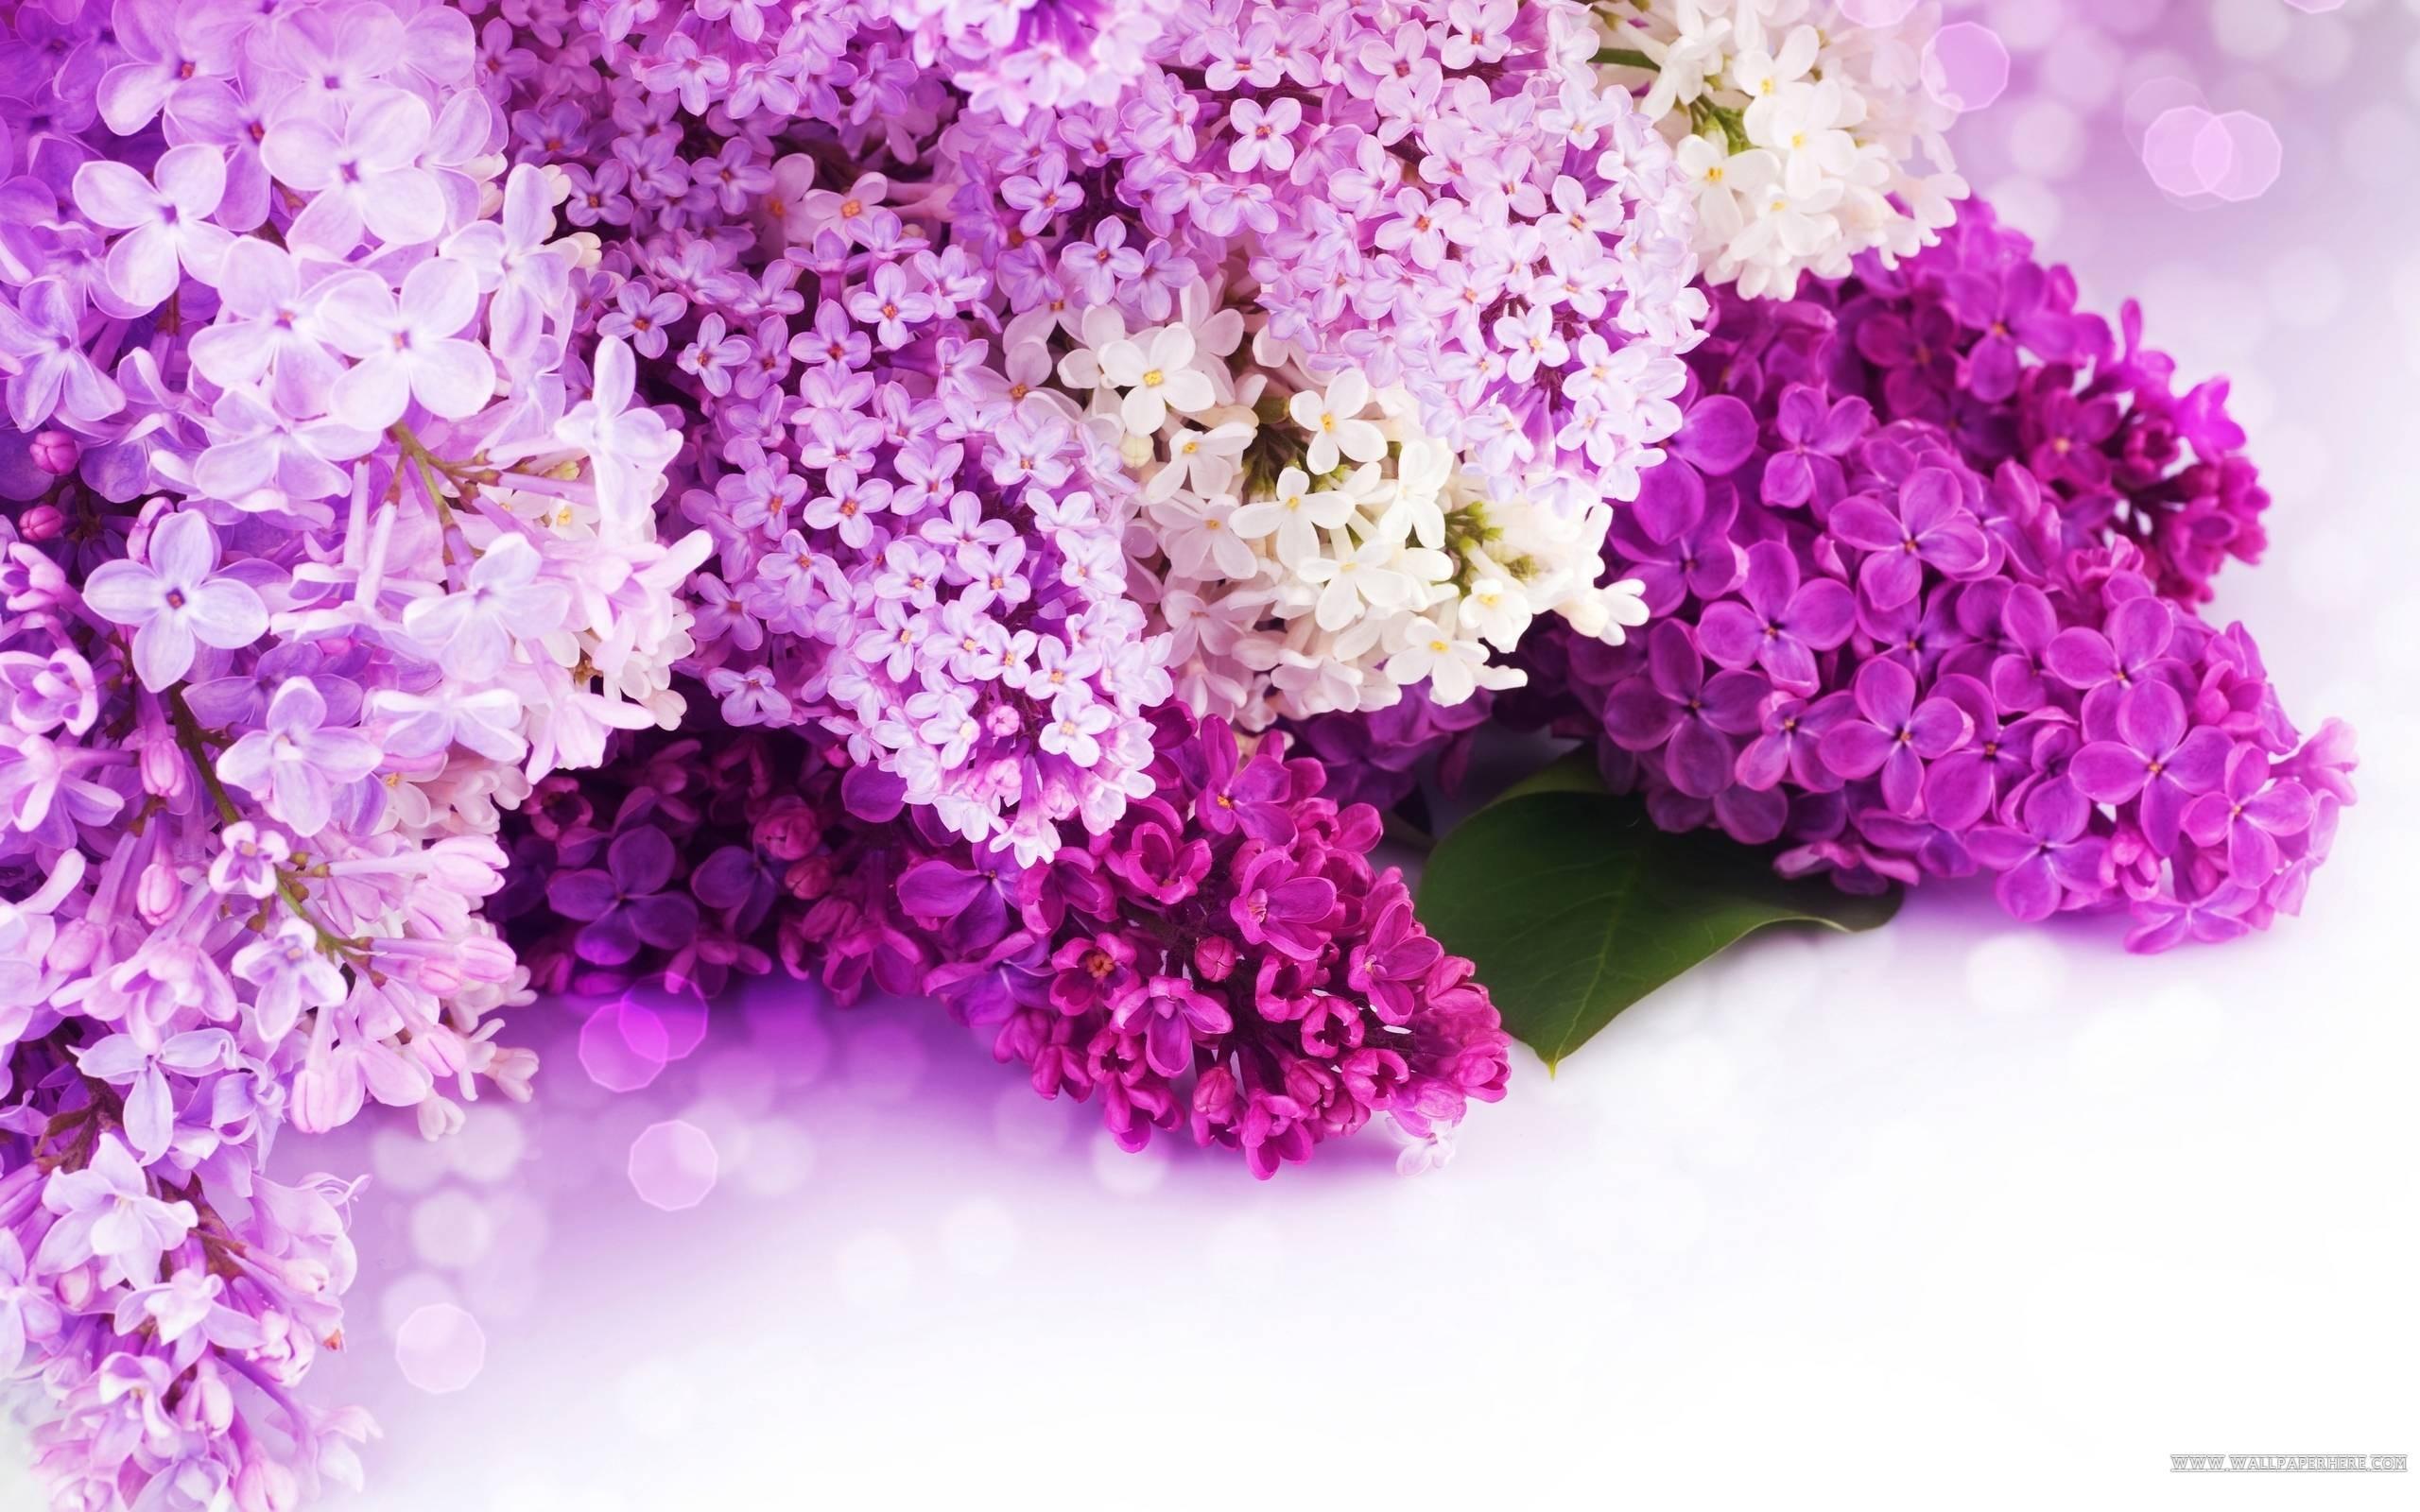 Lilac Wallpaper HD Background, Image, Pics, Photo Free Download